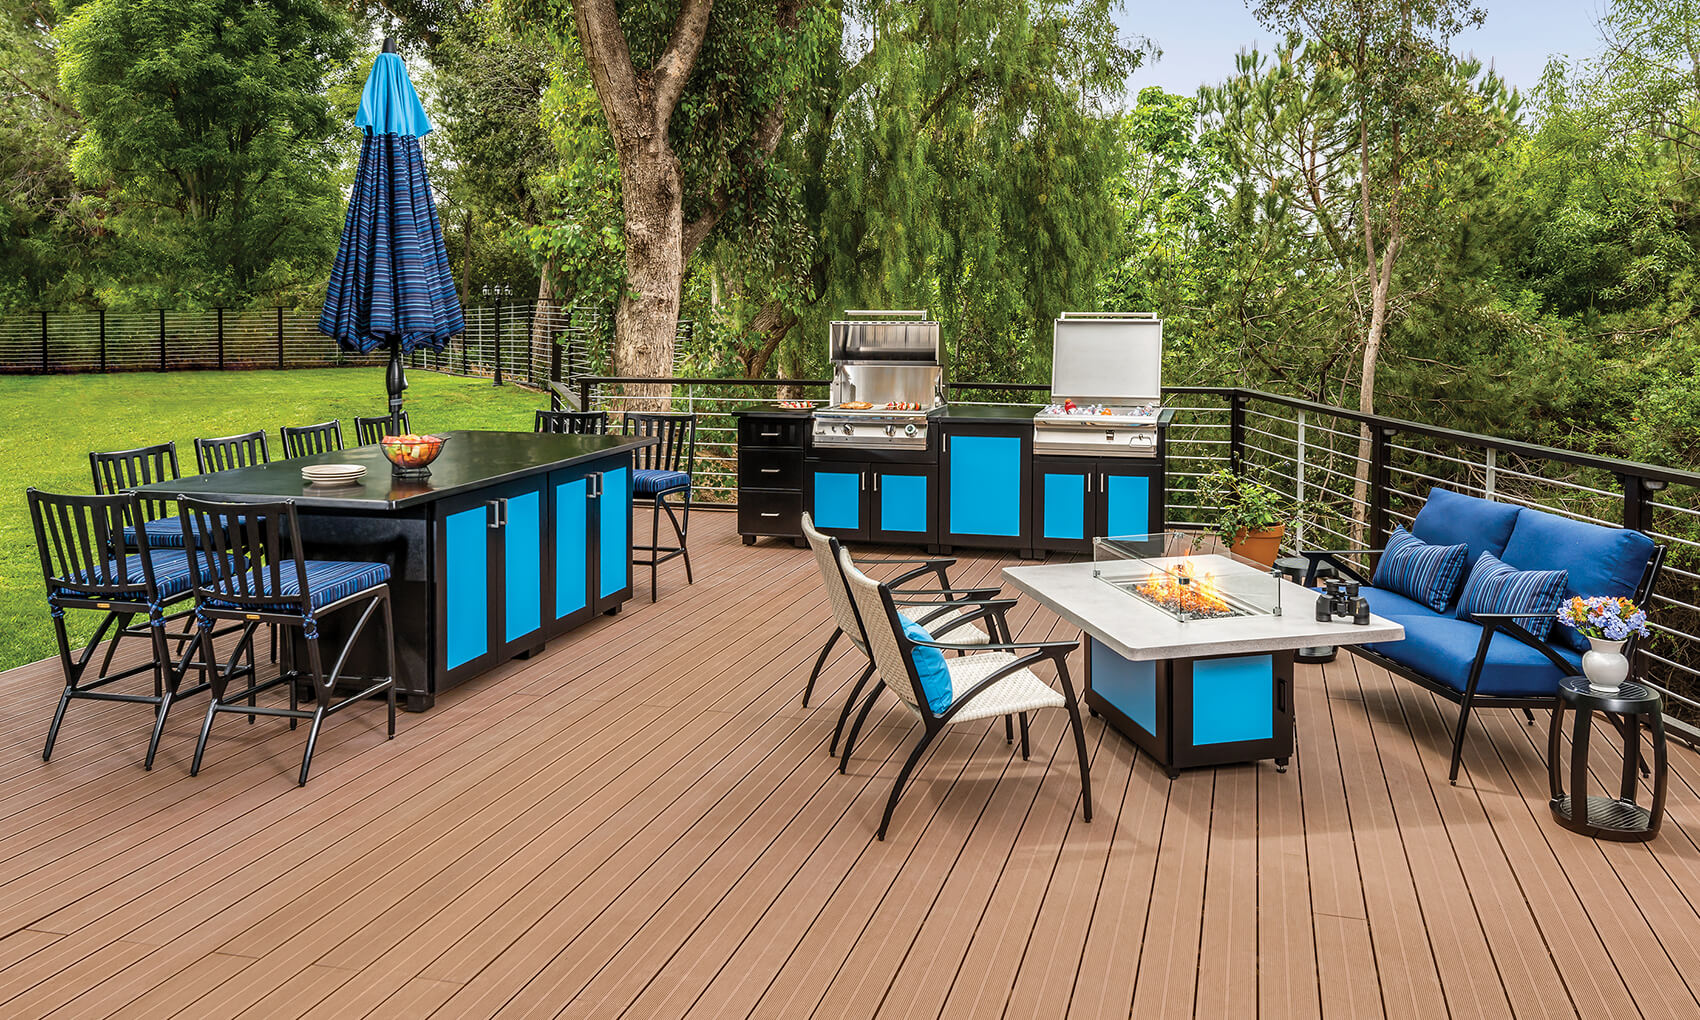 Gensun Outdoor Furniture and Kitchens